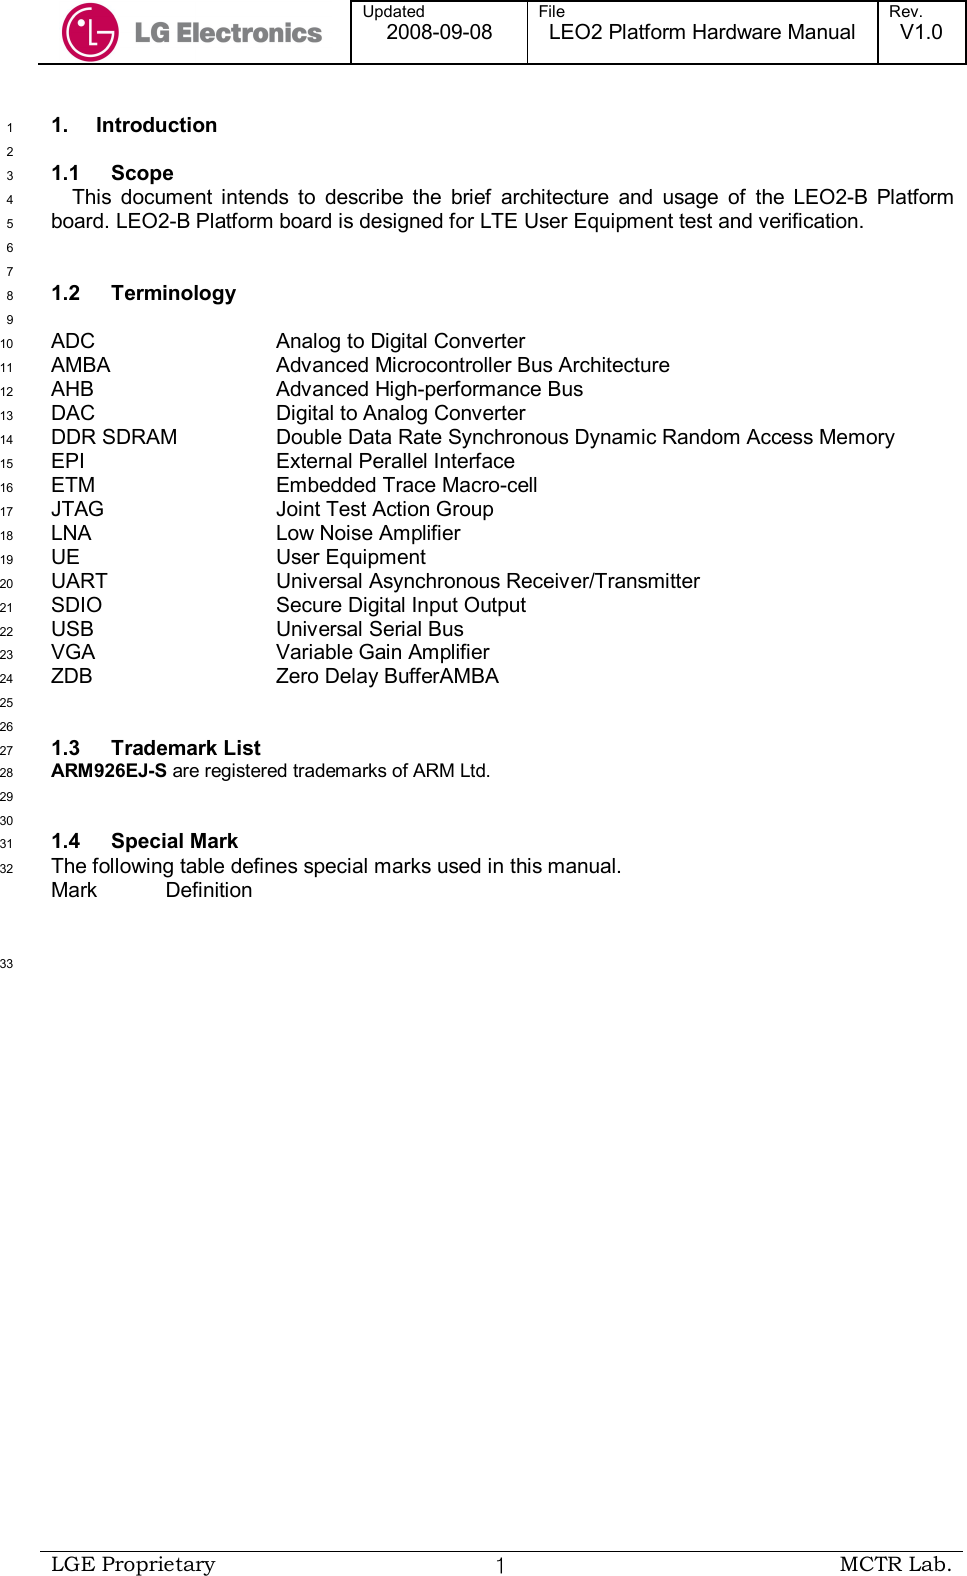  Updated 2008-09-08 File LEO2 Platform Hardware Manual Rev. V1.0   LGE Proprietary  １ MCTR Lab.  1.  Introduction 1  2 1.1  Scope 3 This  document  intends  to  describe  the  brief  architecture  and  usage  of  the  LEO2-B  Platform 4 board. LEO2-B Platform board is designed for LTE User Equipment test and verification.  5  6  7 1.2  Terminology 8  9 ADC      Analog to Digital Converter 10 AMBA      Advanced Microcontroller Bus Architecture 11 AHB      Advanced High-performance Bus 12 DAC      Digital to Analog Converter 13 DDR SDRAM    Double Data Rate Synchronous Dynamic Random Access Memory 14 EPI      External Perallel Interface 15 ETM      Embedded Trace Macro-cell 16 JTAG      Joint Test Action Group 17 LNA      Low Noise Amplifier 18 UE      User Equipment 19 UART       Universal Asynchronous Receiver/Transmitter 20 SDIO      Secure Digital Input Output 21 USB       Universal Serial Bus 22 VGA      Variable Gain Amplifier 23 ZDB      Zero Delay BufferAMBA 24  25  26 1.3  Trademark List 27 ARM926EJ-S are registered trademarks of ARM Ltd. 28  29  30 1.4  Special Mark 31 The following table defines special marks used in this manual. 32 Mark  Definition        33 